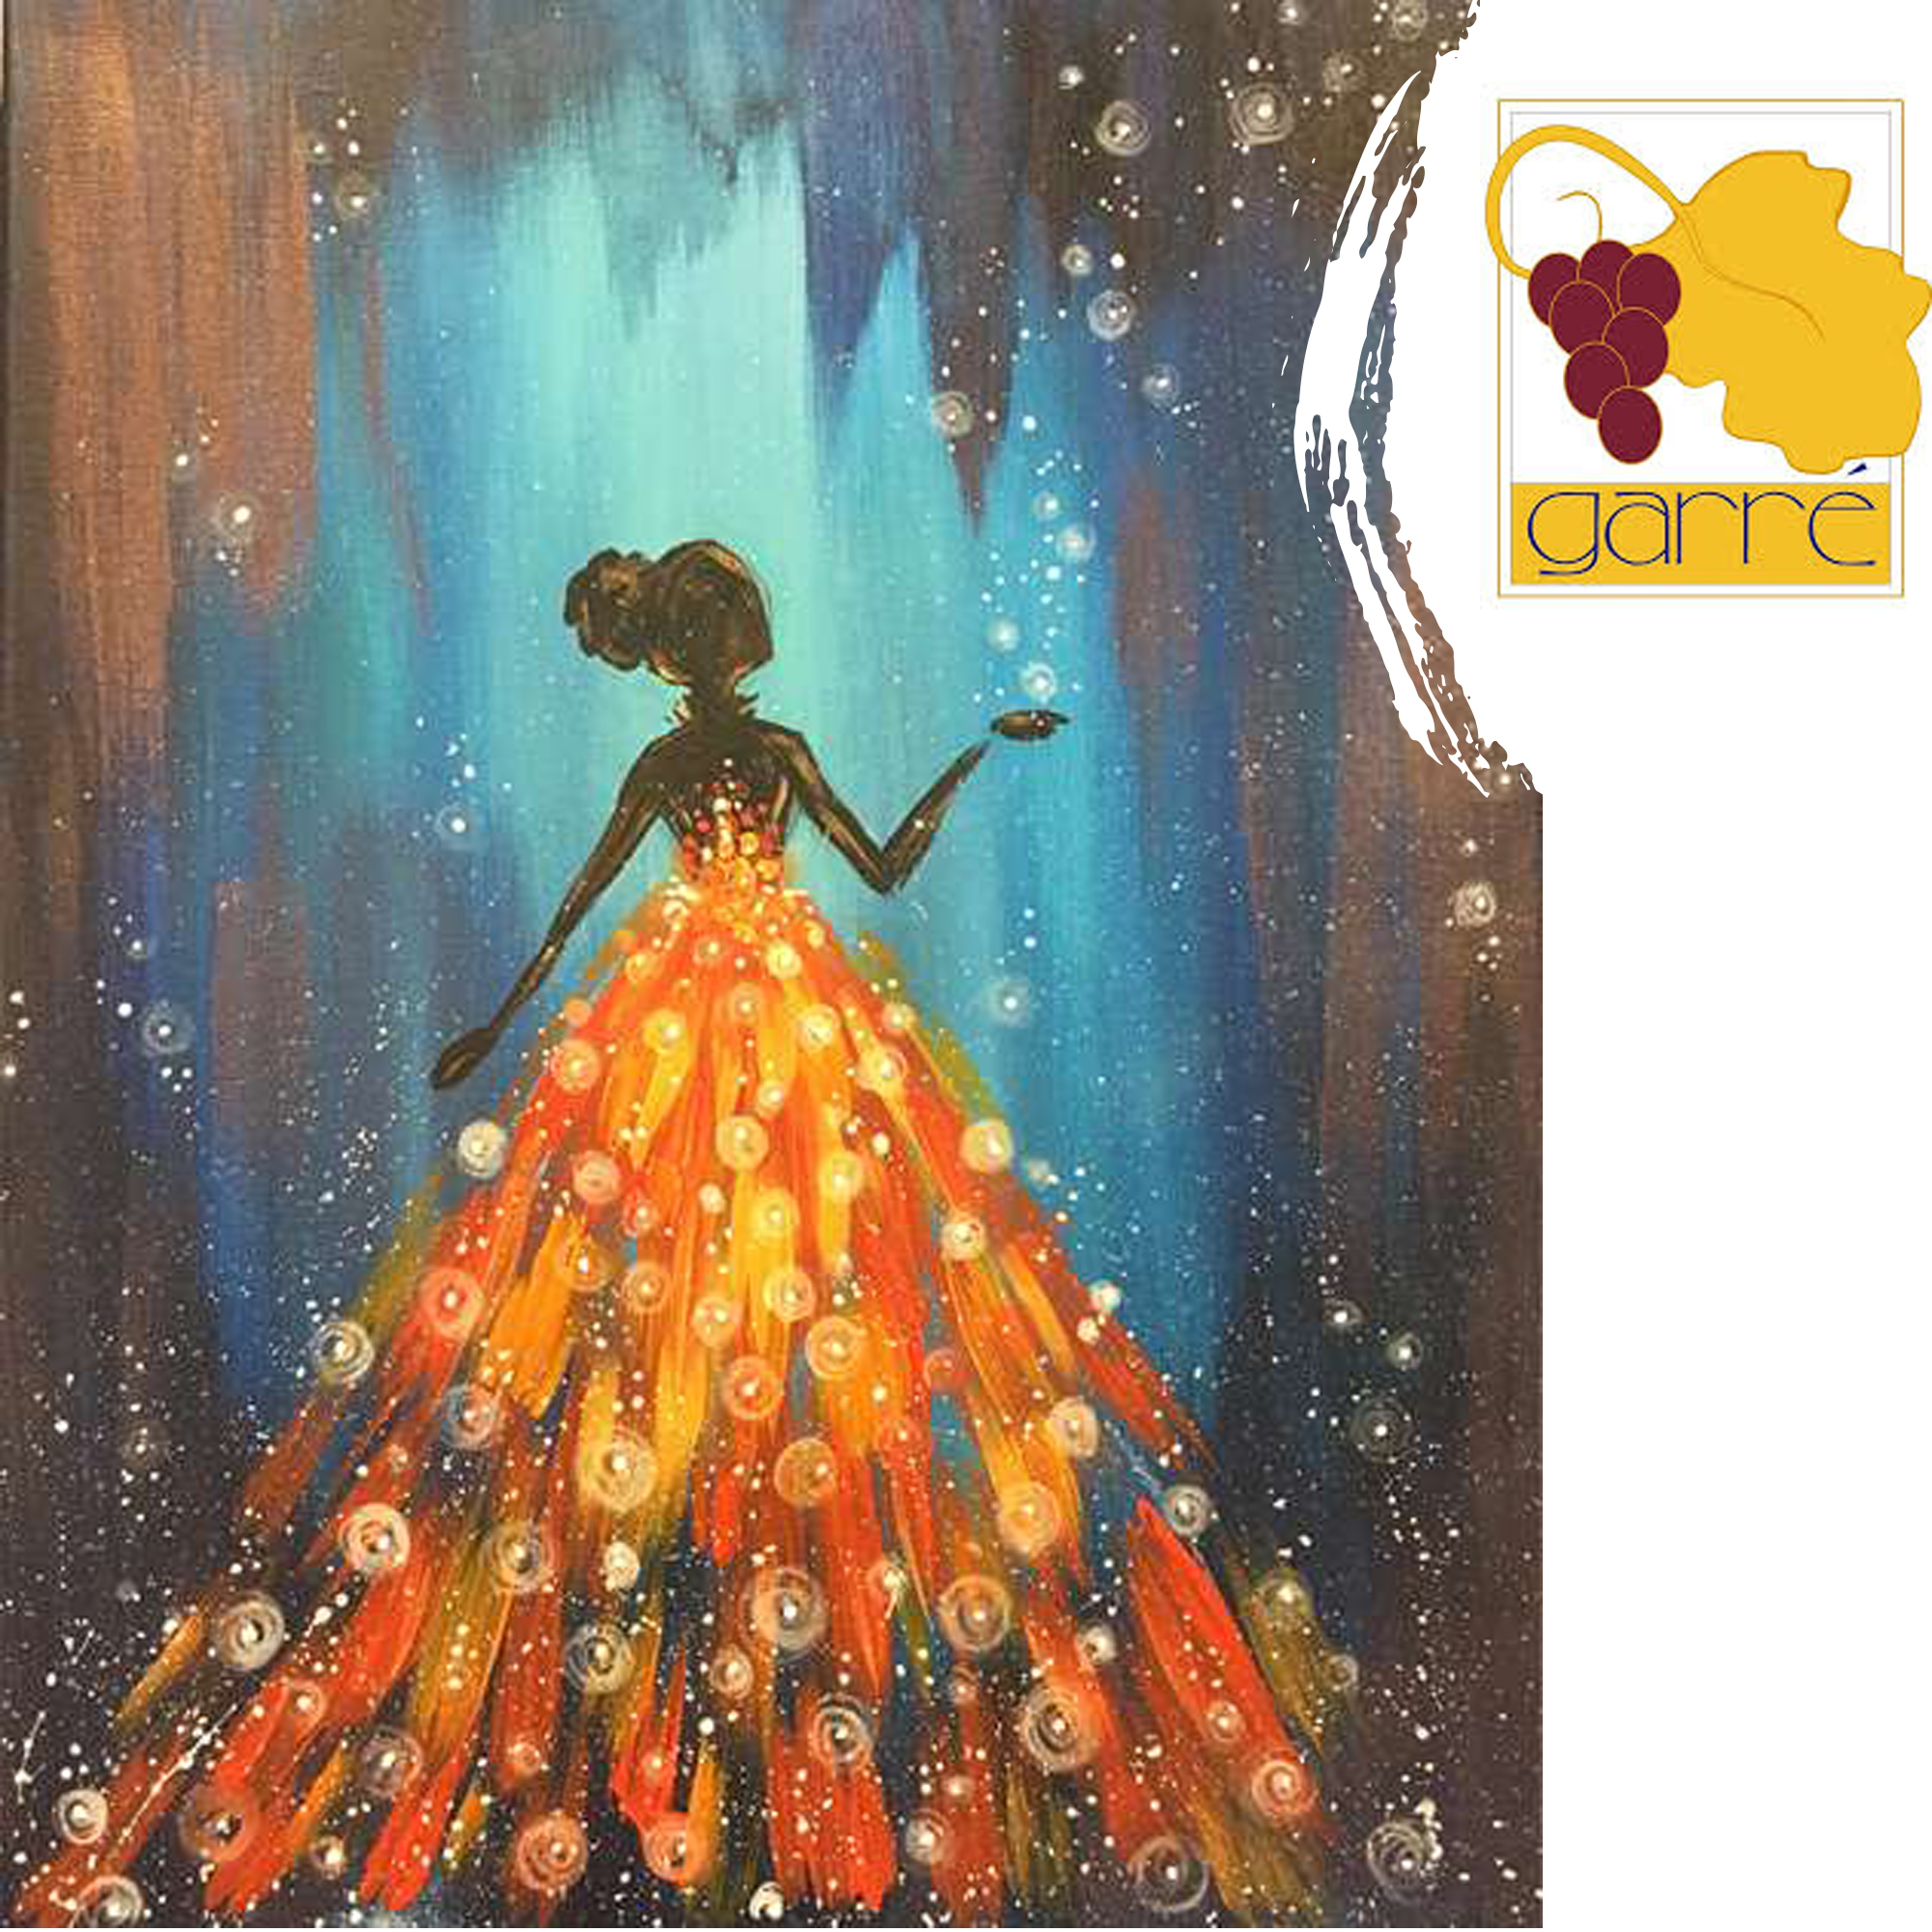 Sip and Paint at Garre' Vineyards